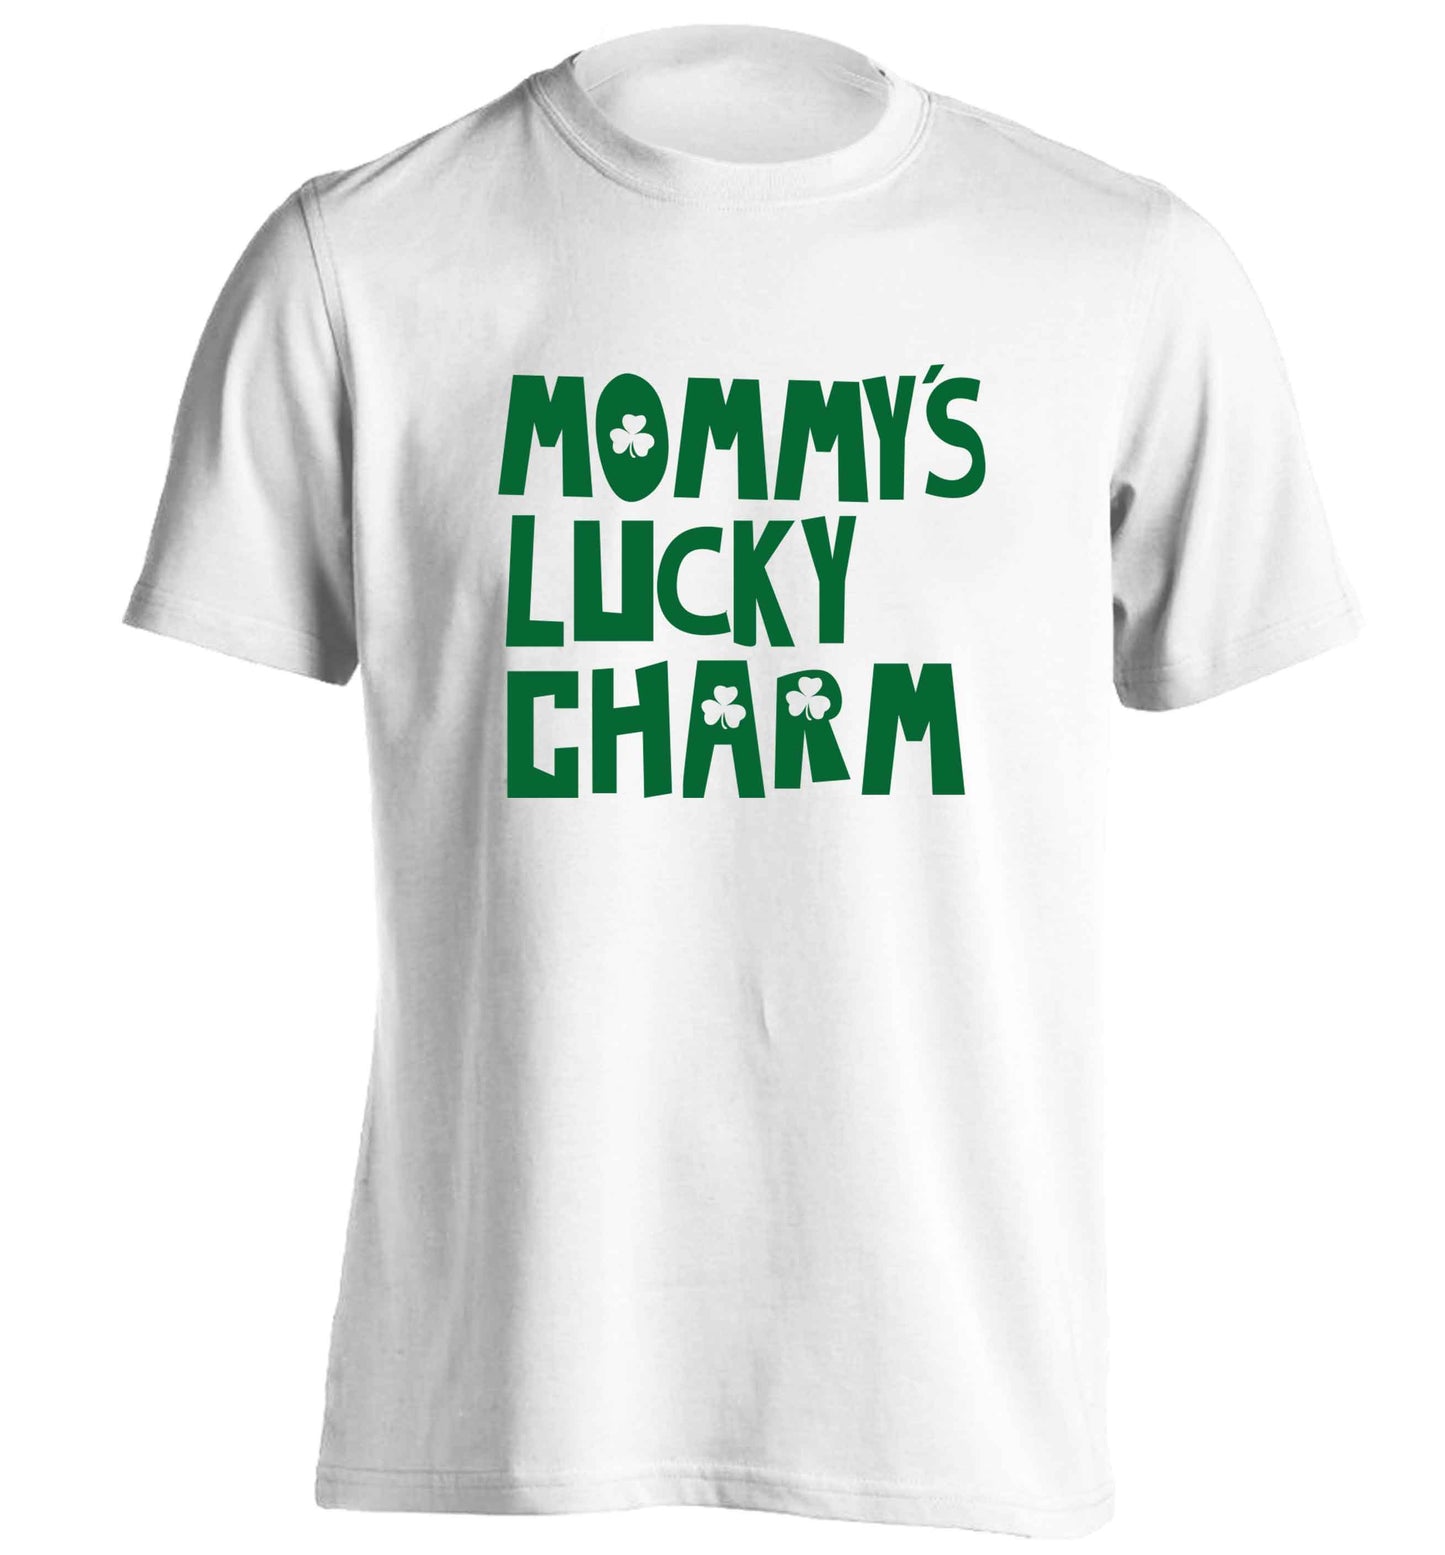 Mommy's lucky charm adults unisex white Tshirt 2XL